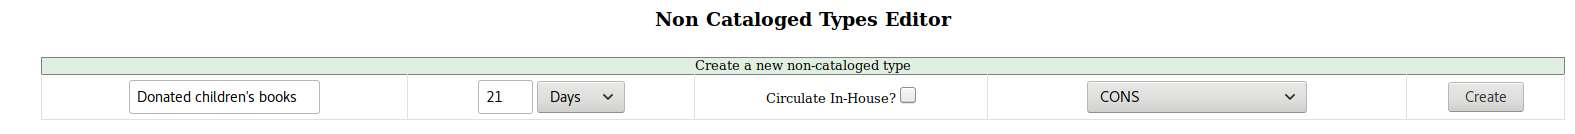 Form titled 'Non Cataloged Types Editor' for creating a new non-cataloged type. Fields: name ('Donated children’s books'), duration (21 Days), circulate in-house (unchecked), type (CONS), Create button.